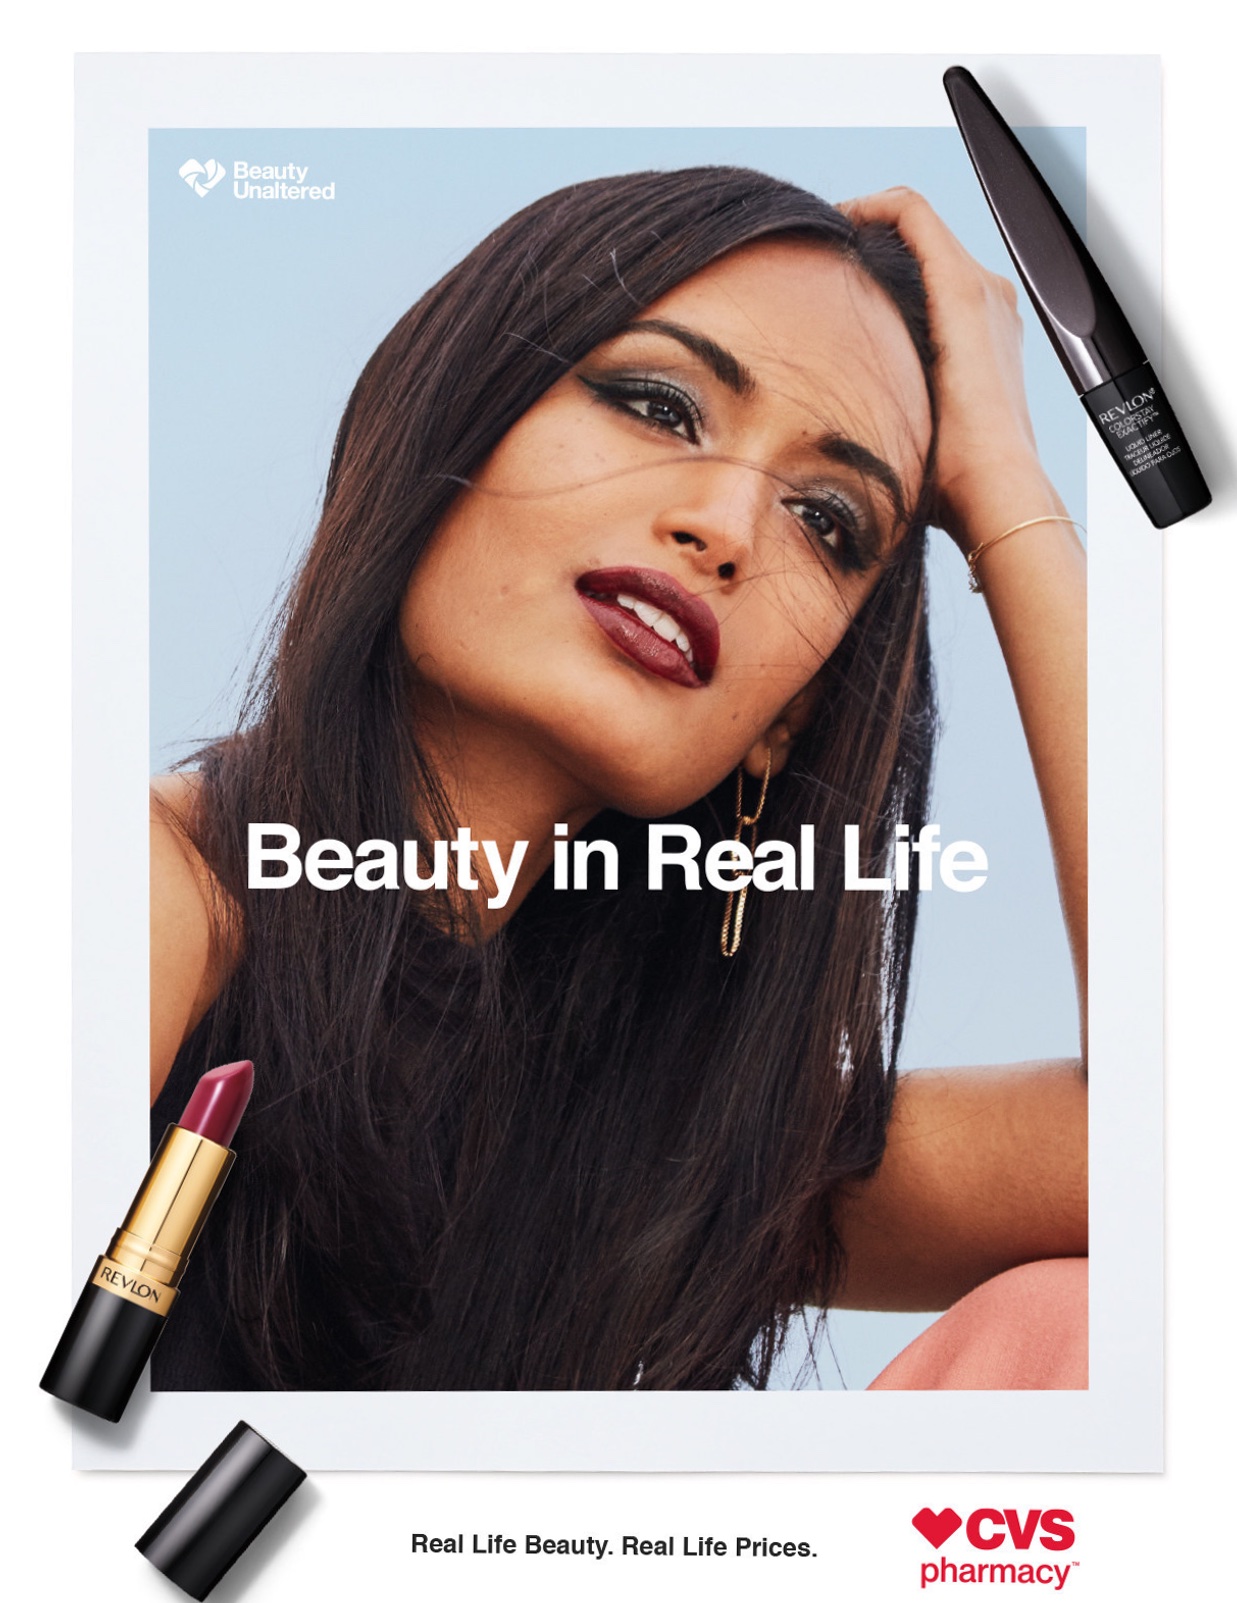 CVS rolls-out first campaign with new anti-editing Beauty Mark
